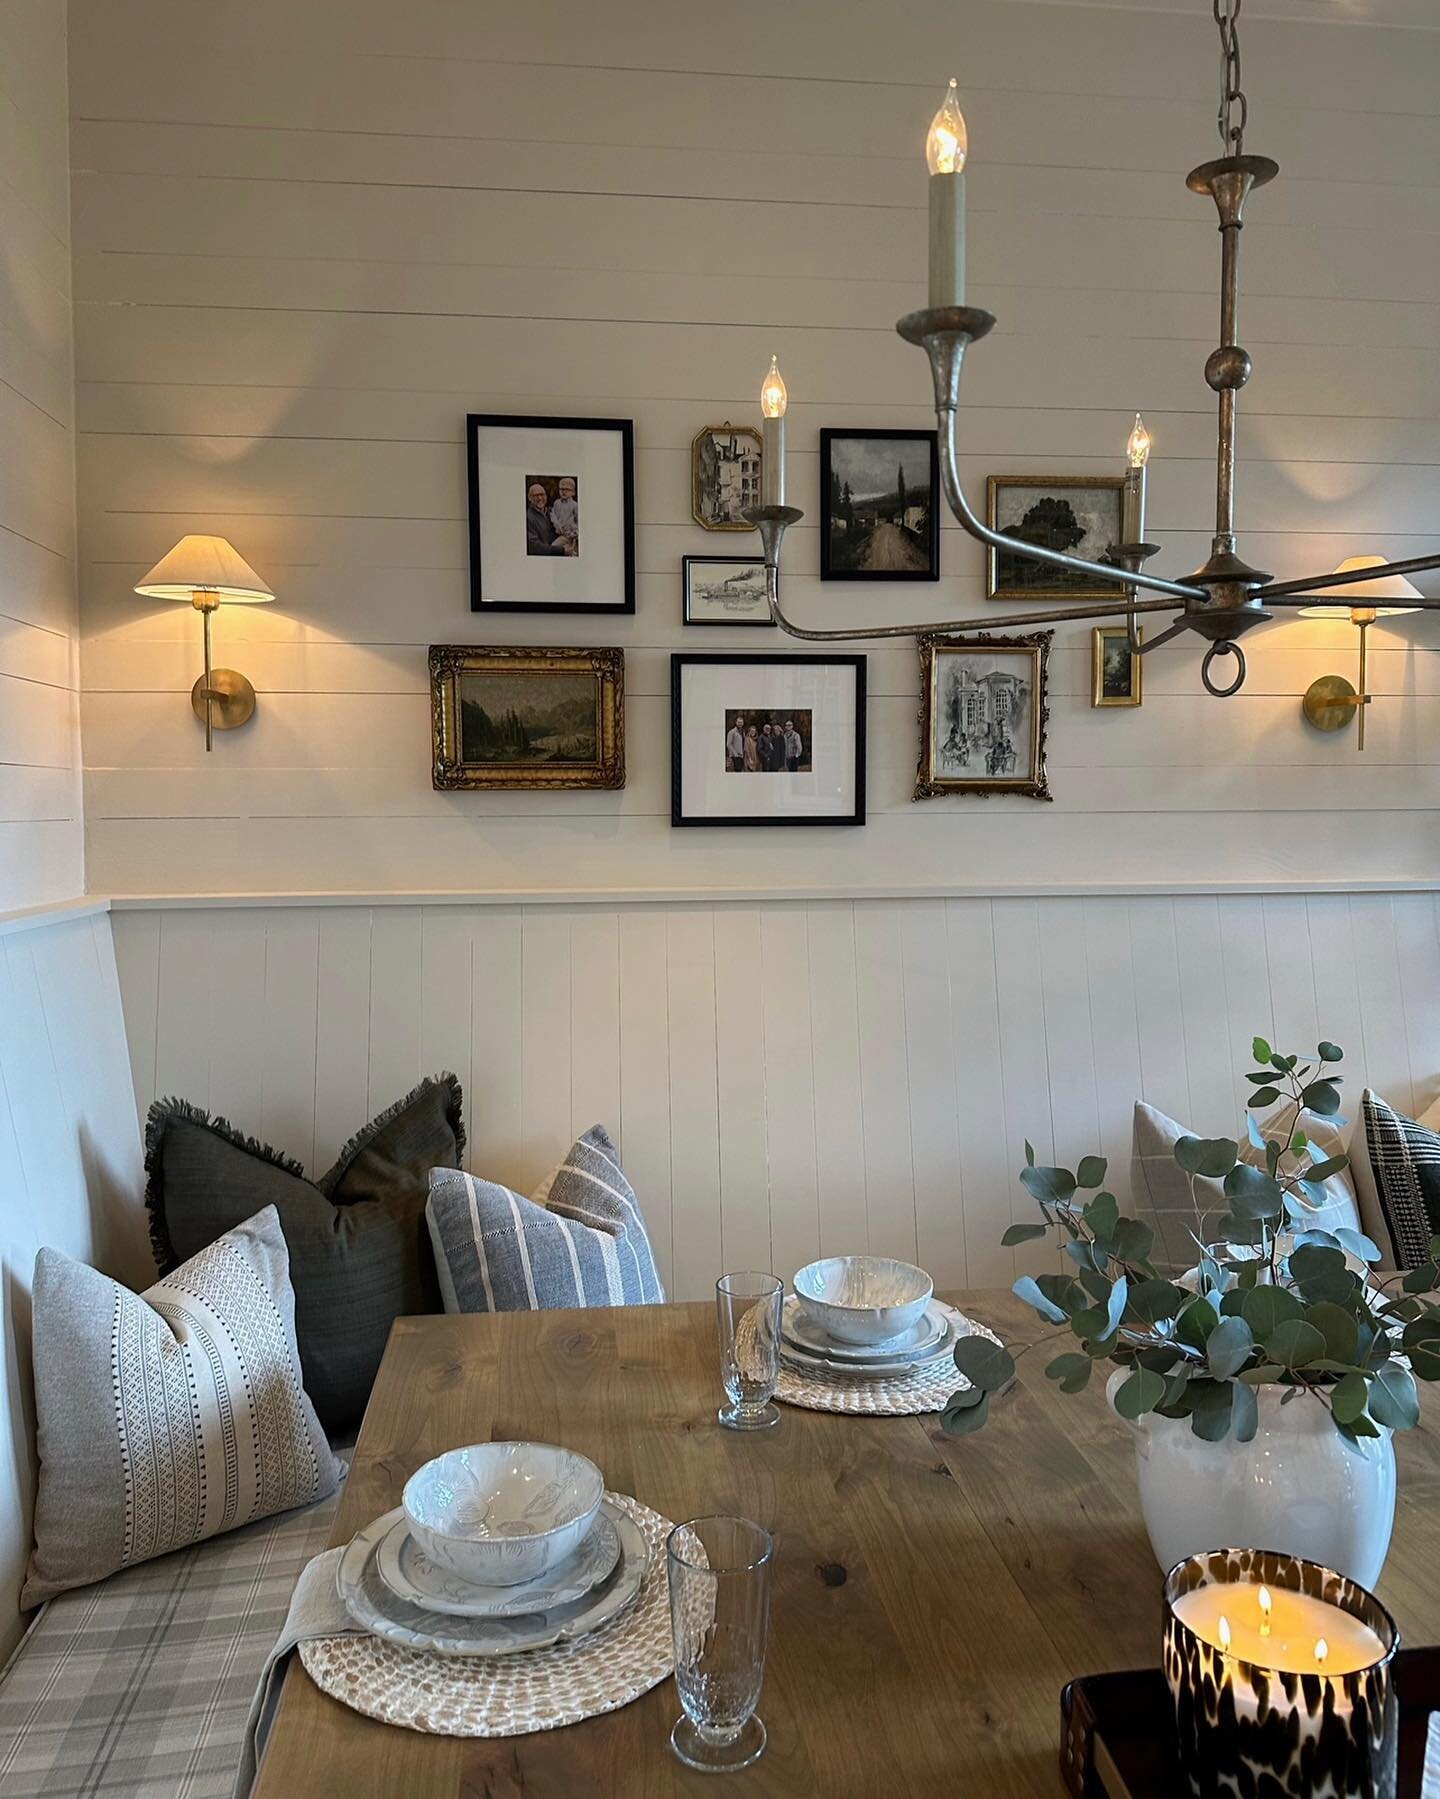 Rainy day dinner at our English Farmhouse Project ✨

This custom banquette, sconces, collected photos, and beautiful table scape make for the most inviting spot to sit and have a conversation over a meal! 

#truthandco #dinner #diningroom #custombanq